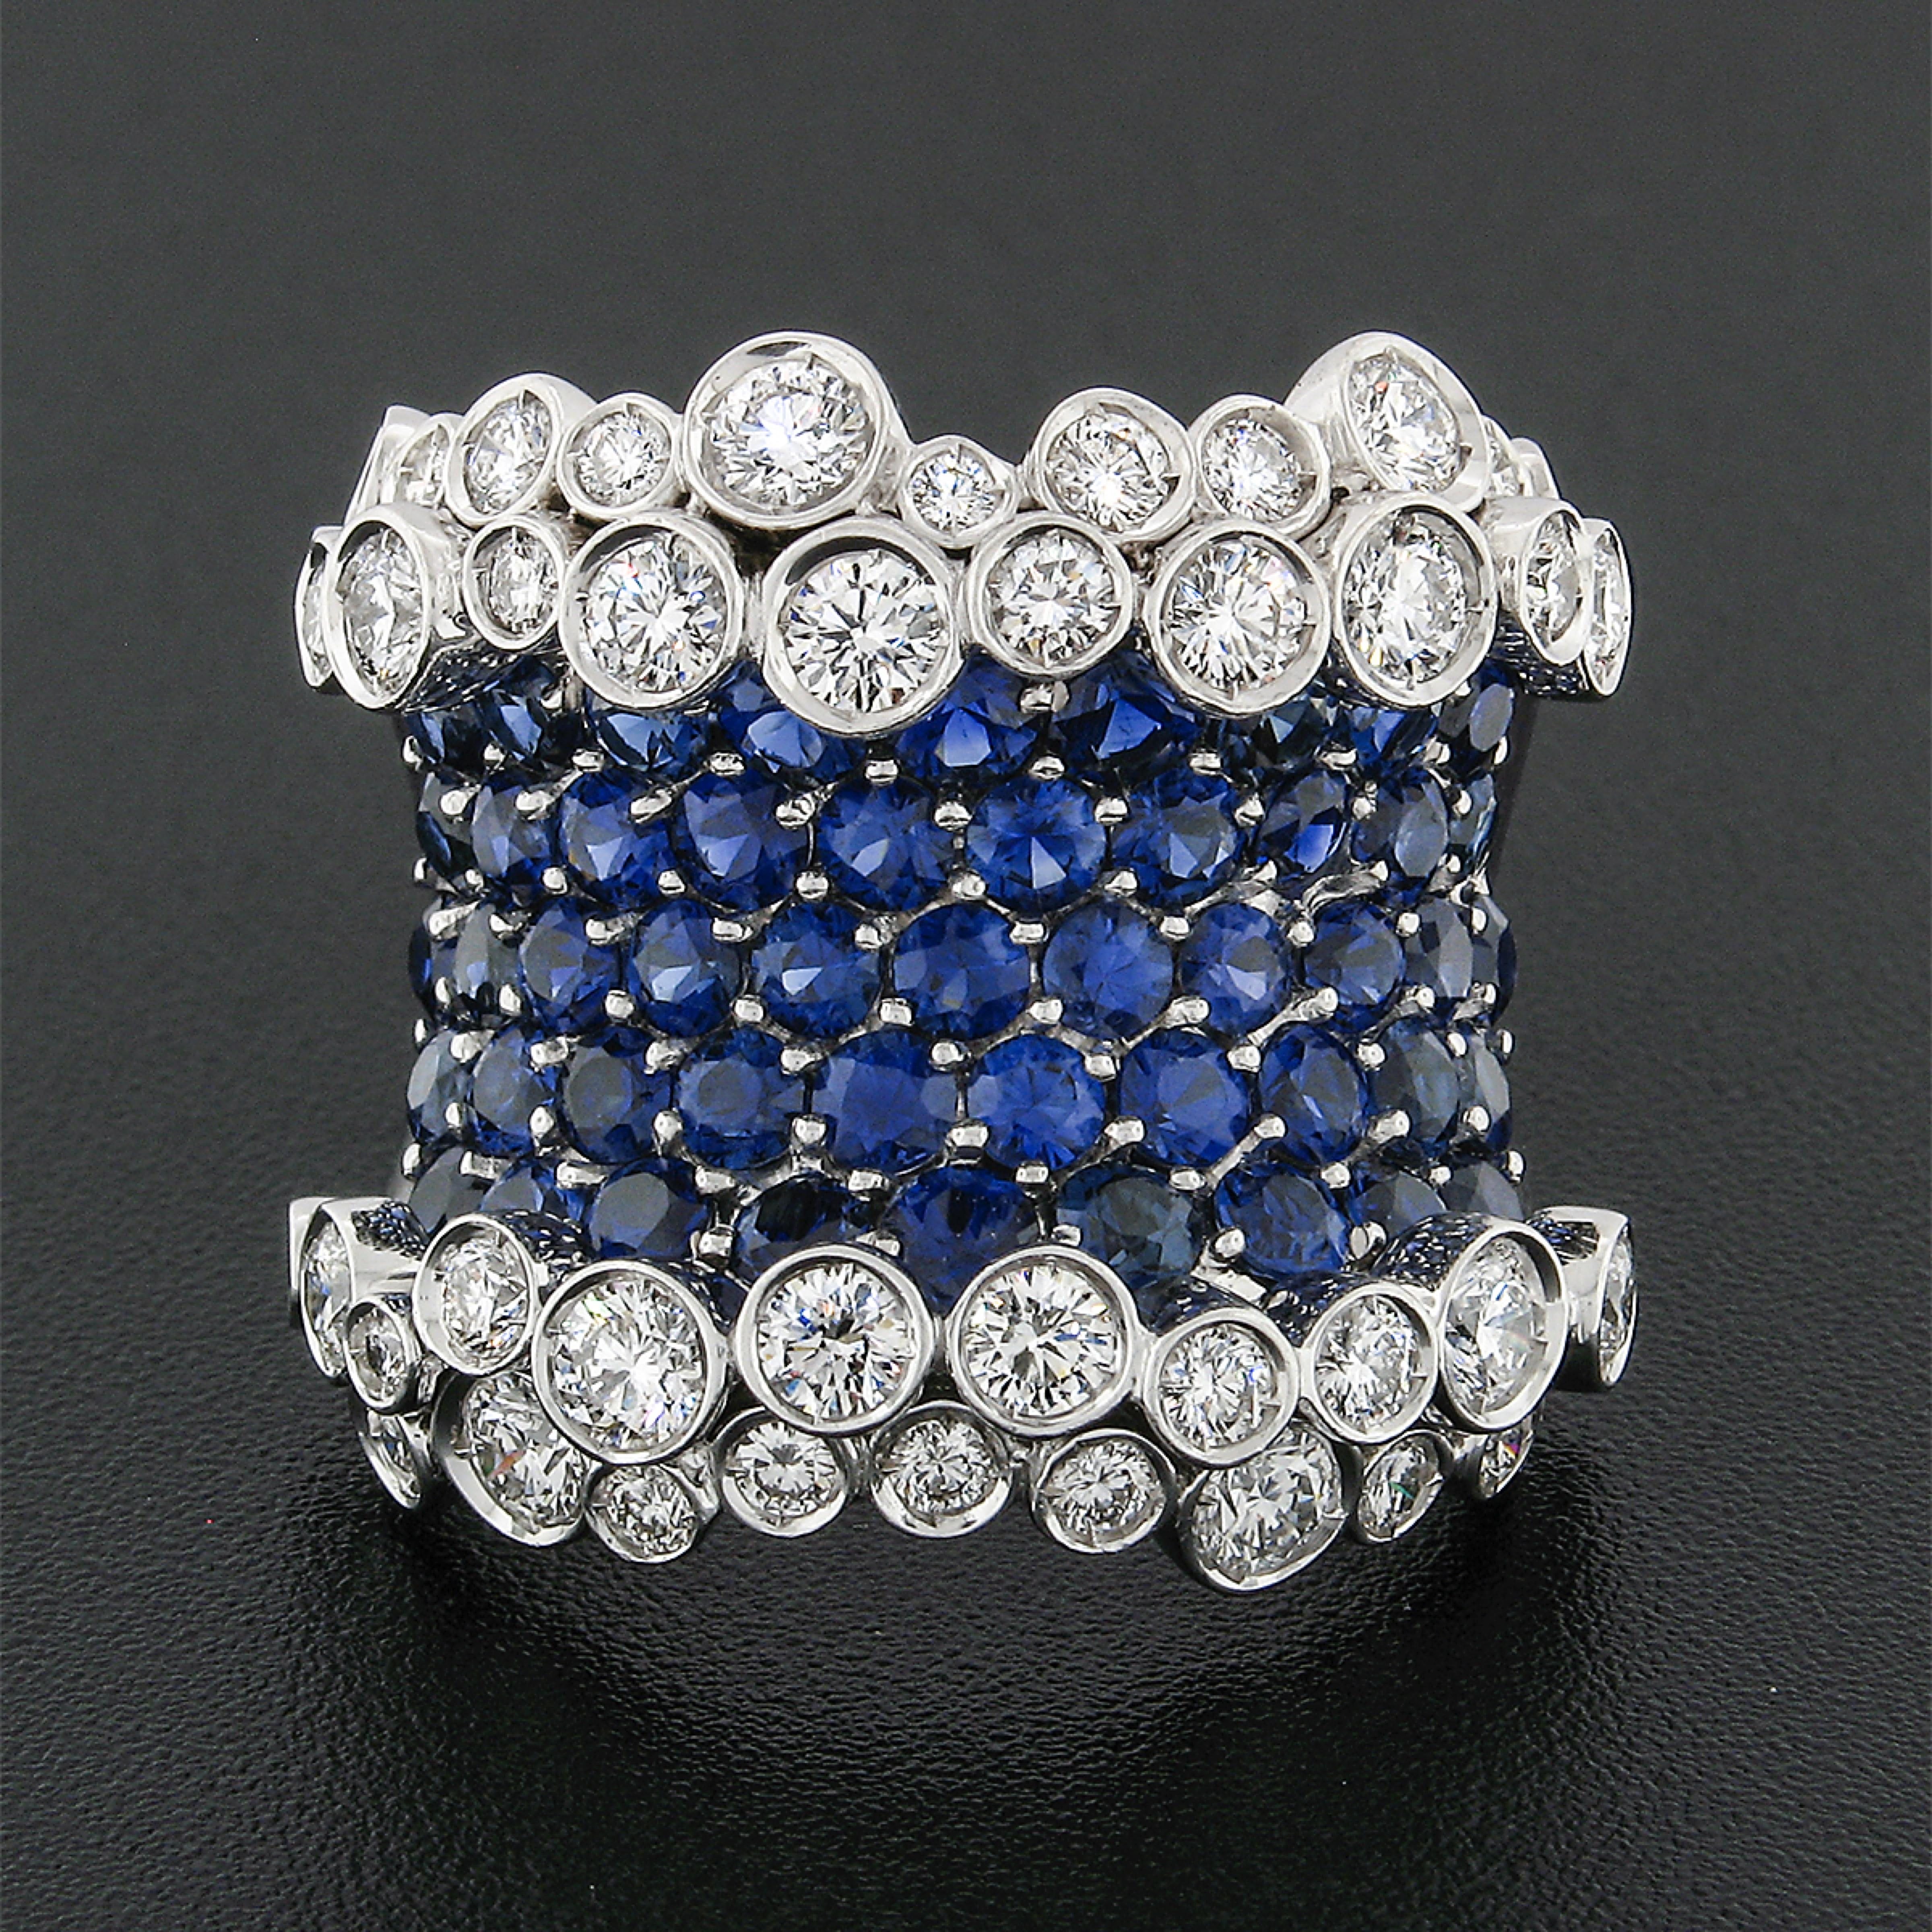 Here we have an absolutely magnificent cocktail ring designed by Stefan Hafner and crafted in Italy from solid 18k white gold. The ring features a unique wide design set with very fine quality round brilliant sapphires and diamonds throughout. The